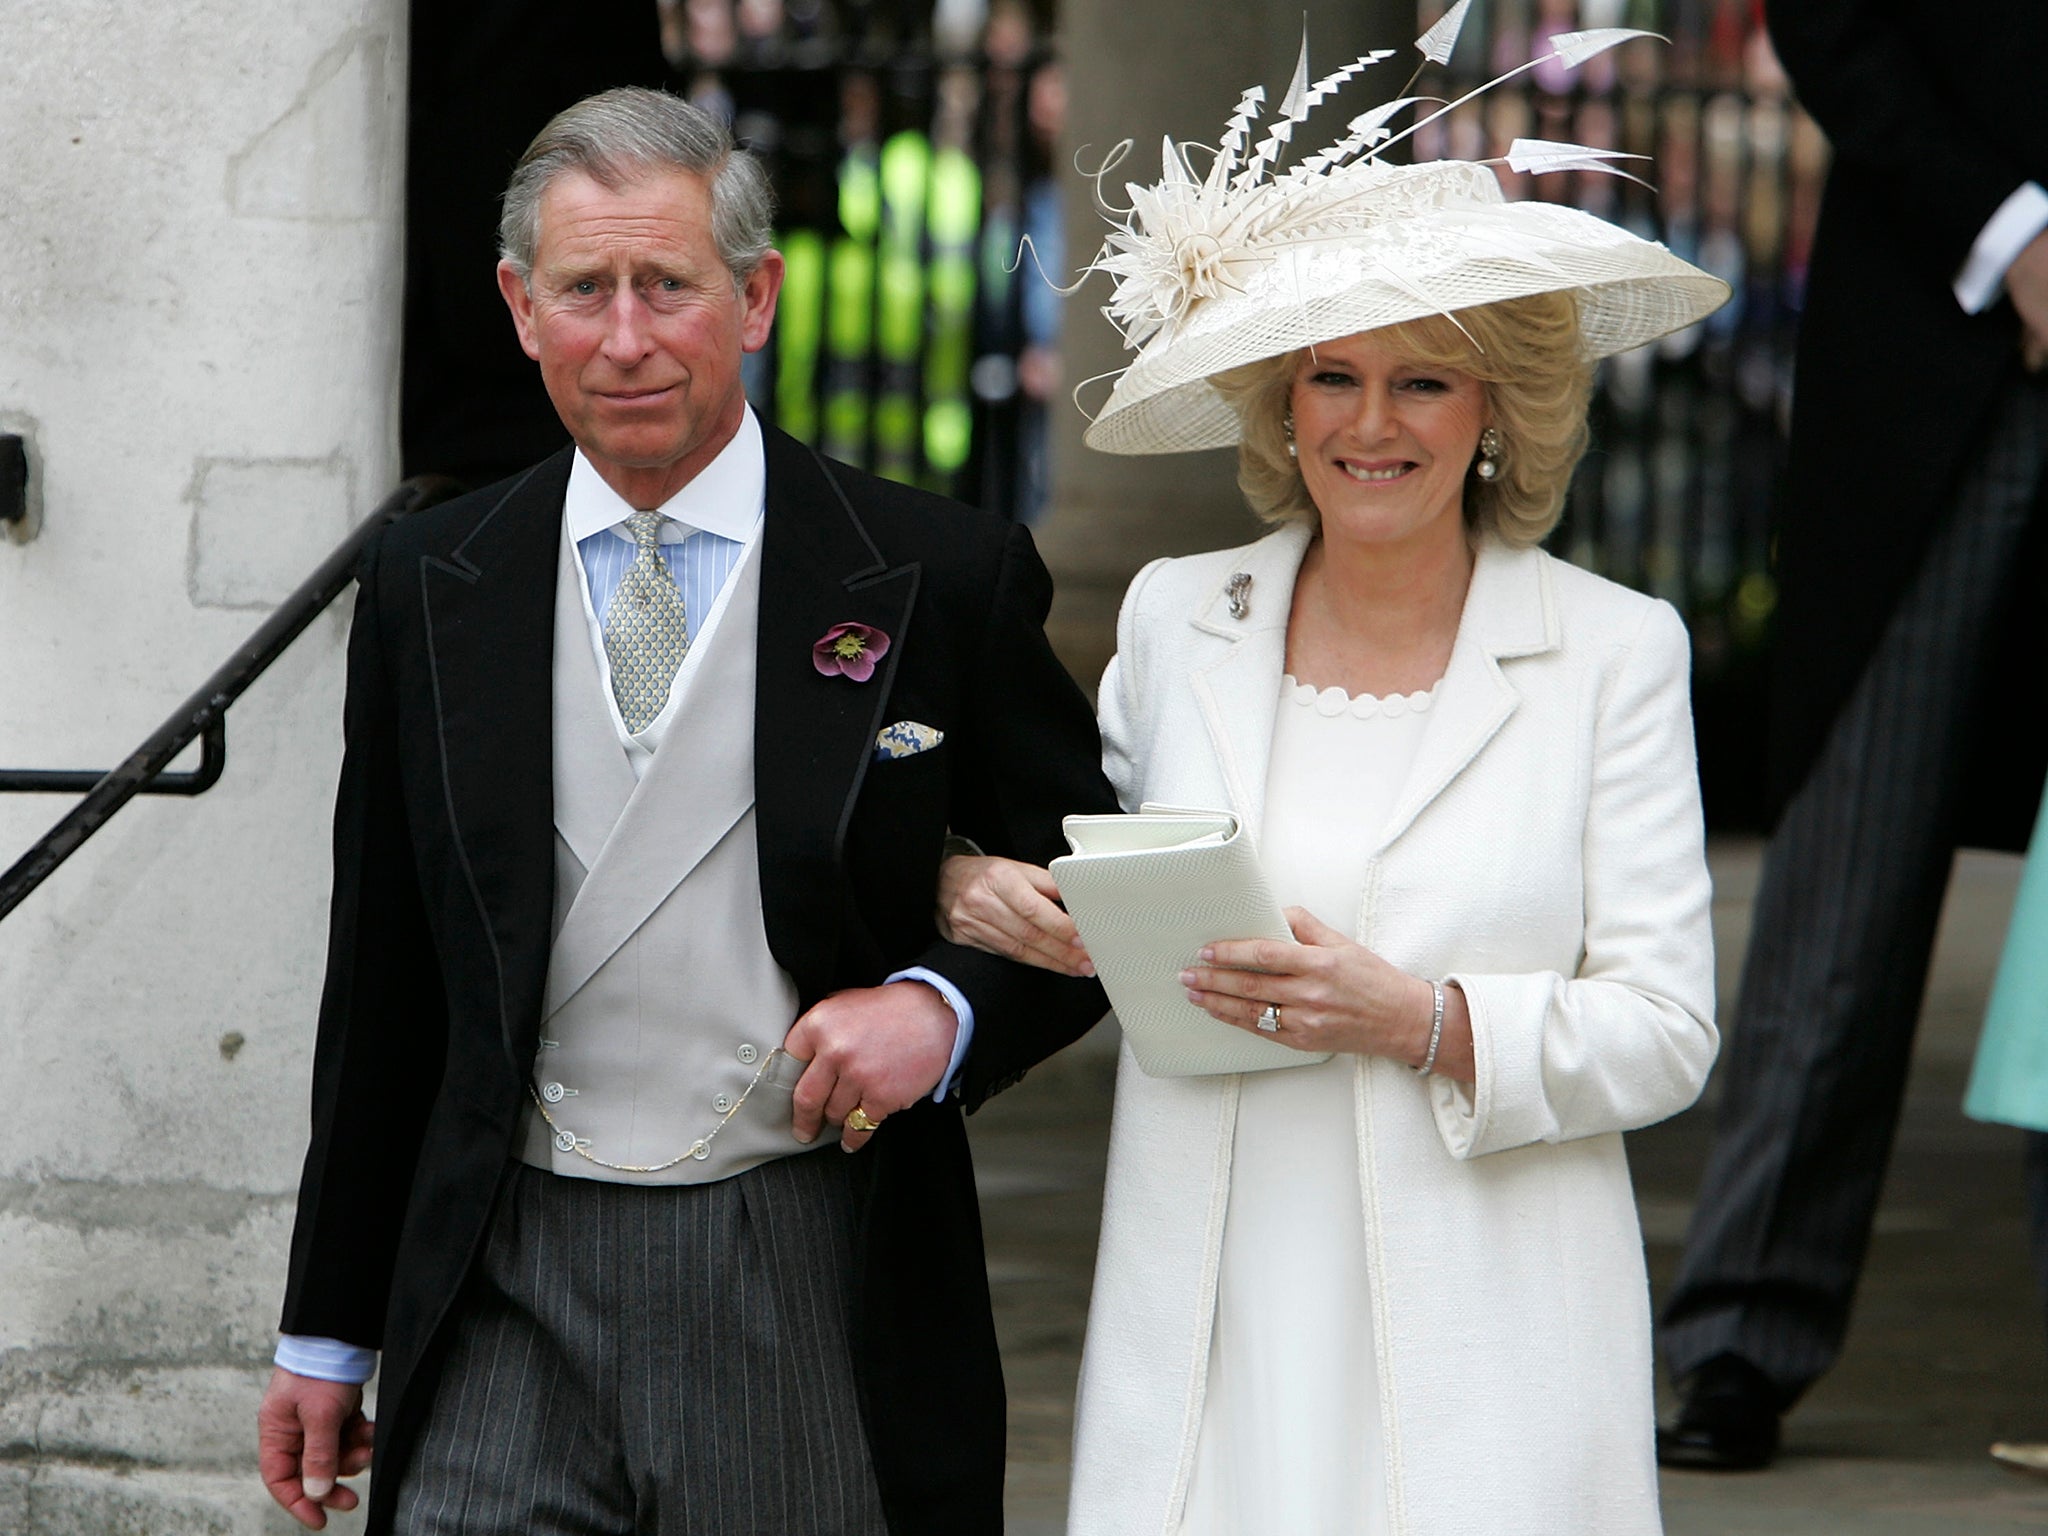 Charles and Camilla at their wedding ceremony in 2005